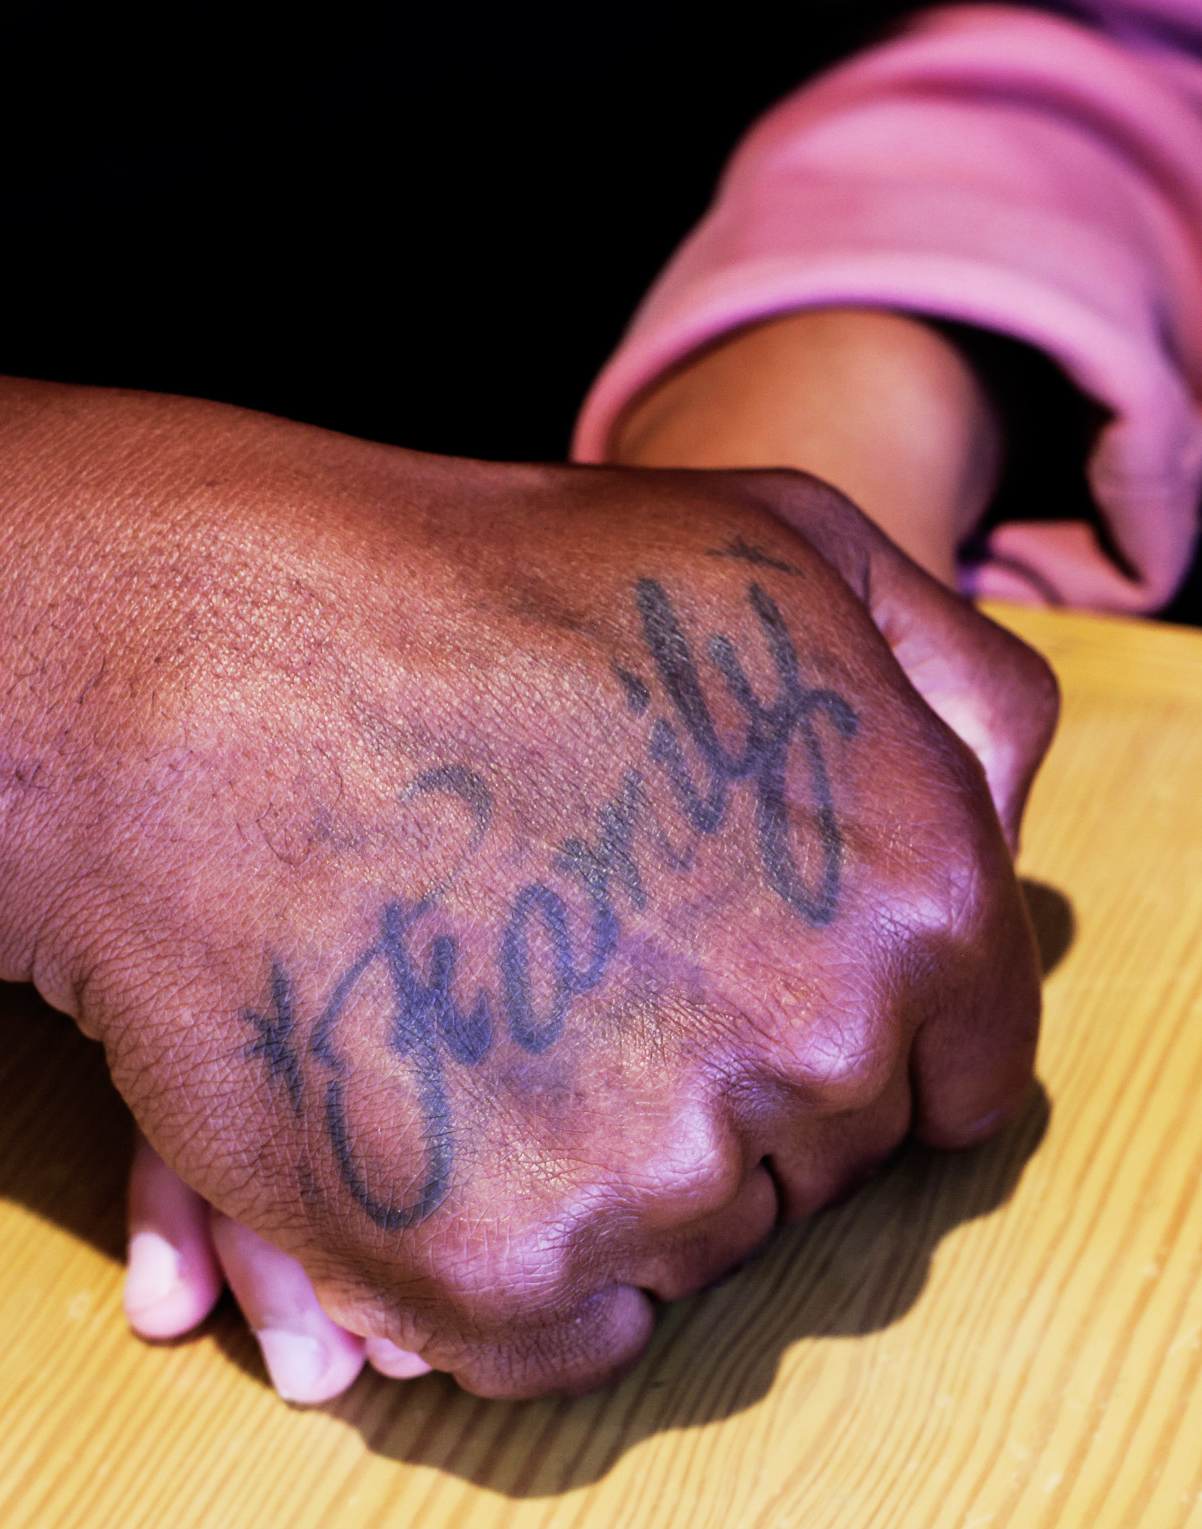 A hand with a &quot;Family&quot; tattoo resting on another hand atop a wooden surface.